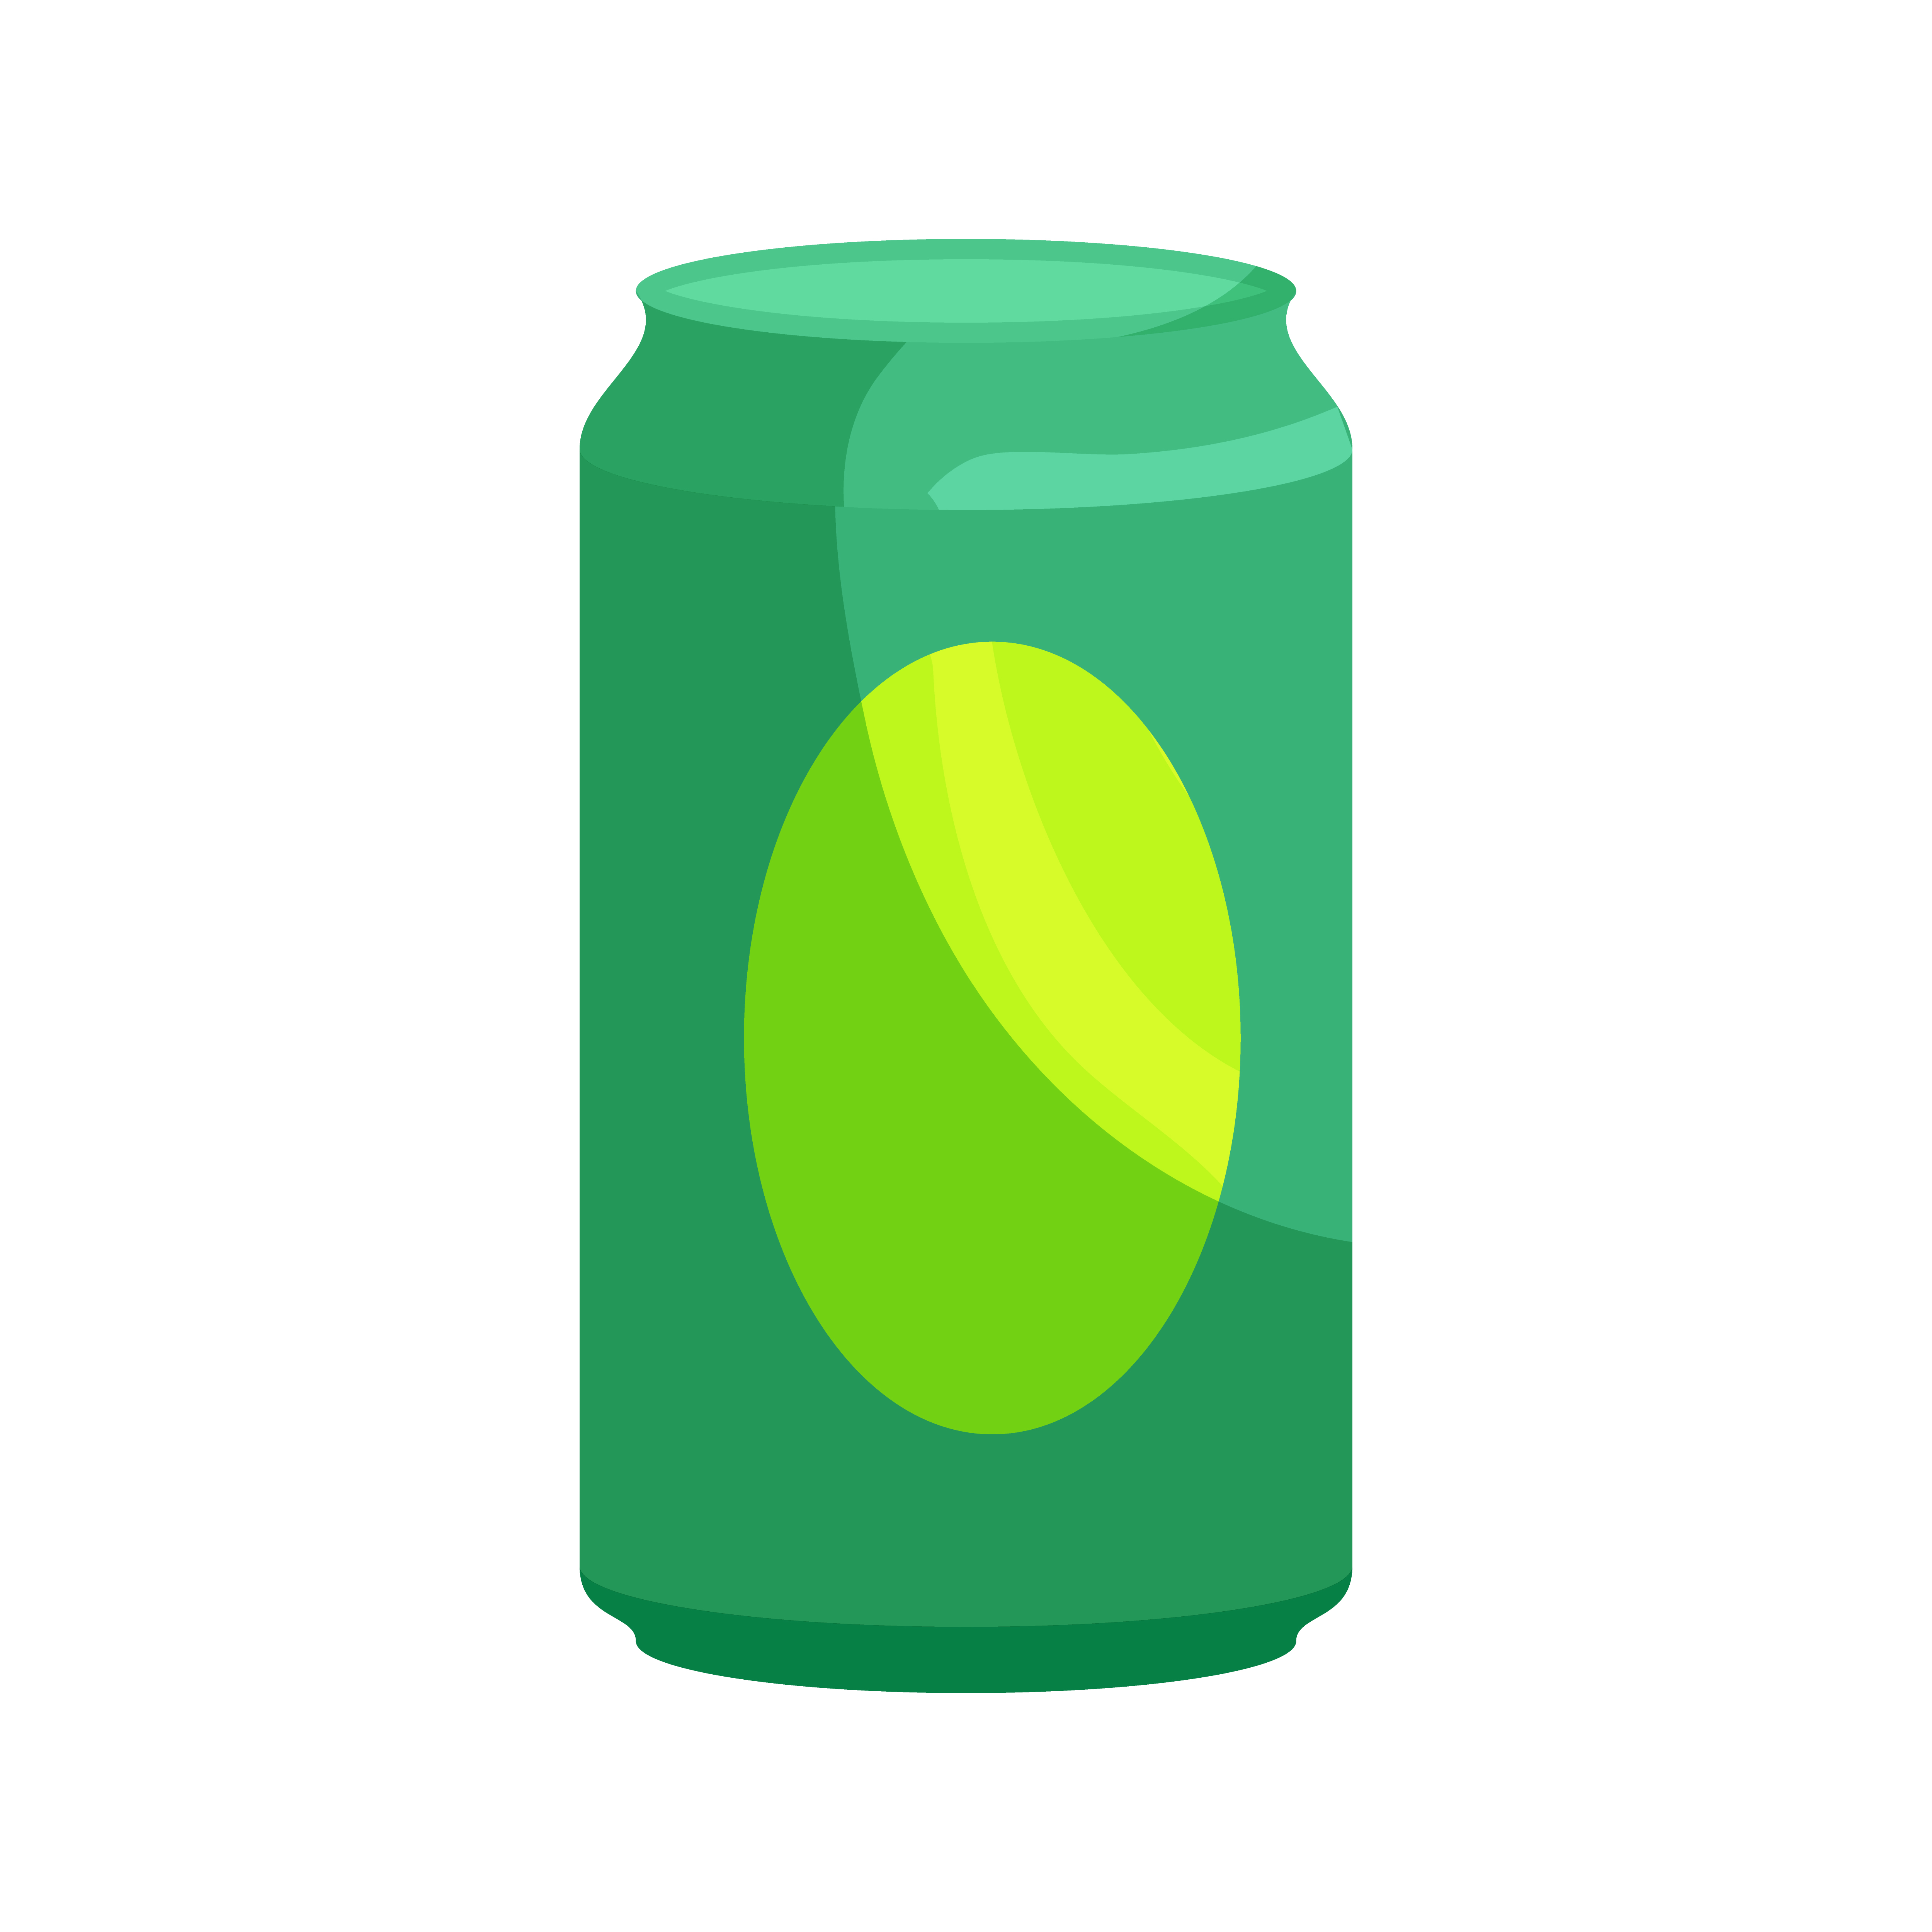 —Pngtree—green aluminum can icon cartoon_5097000.png